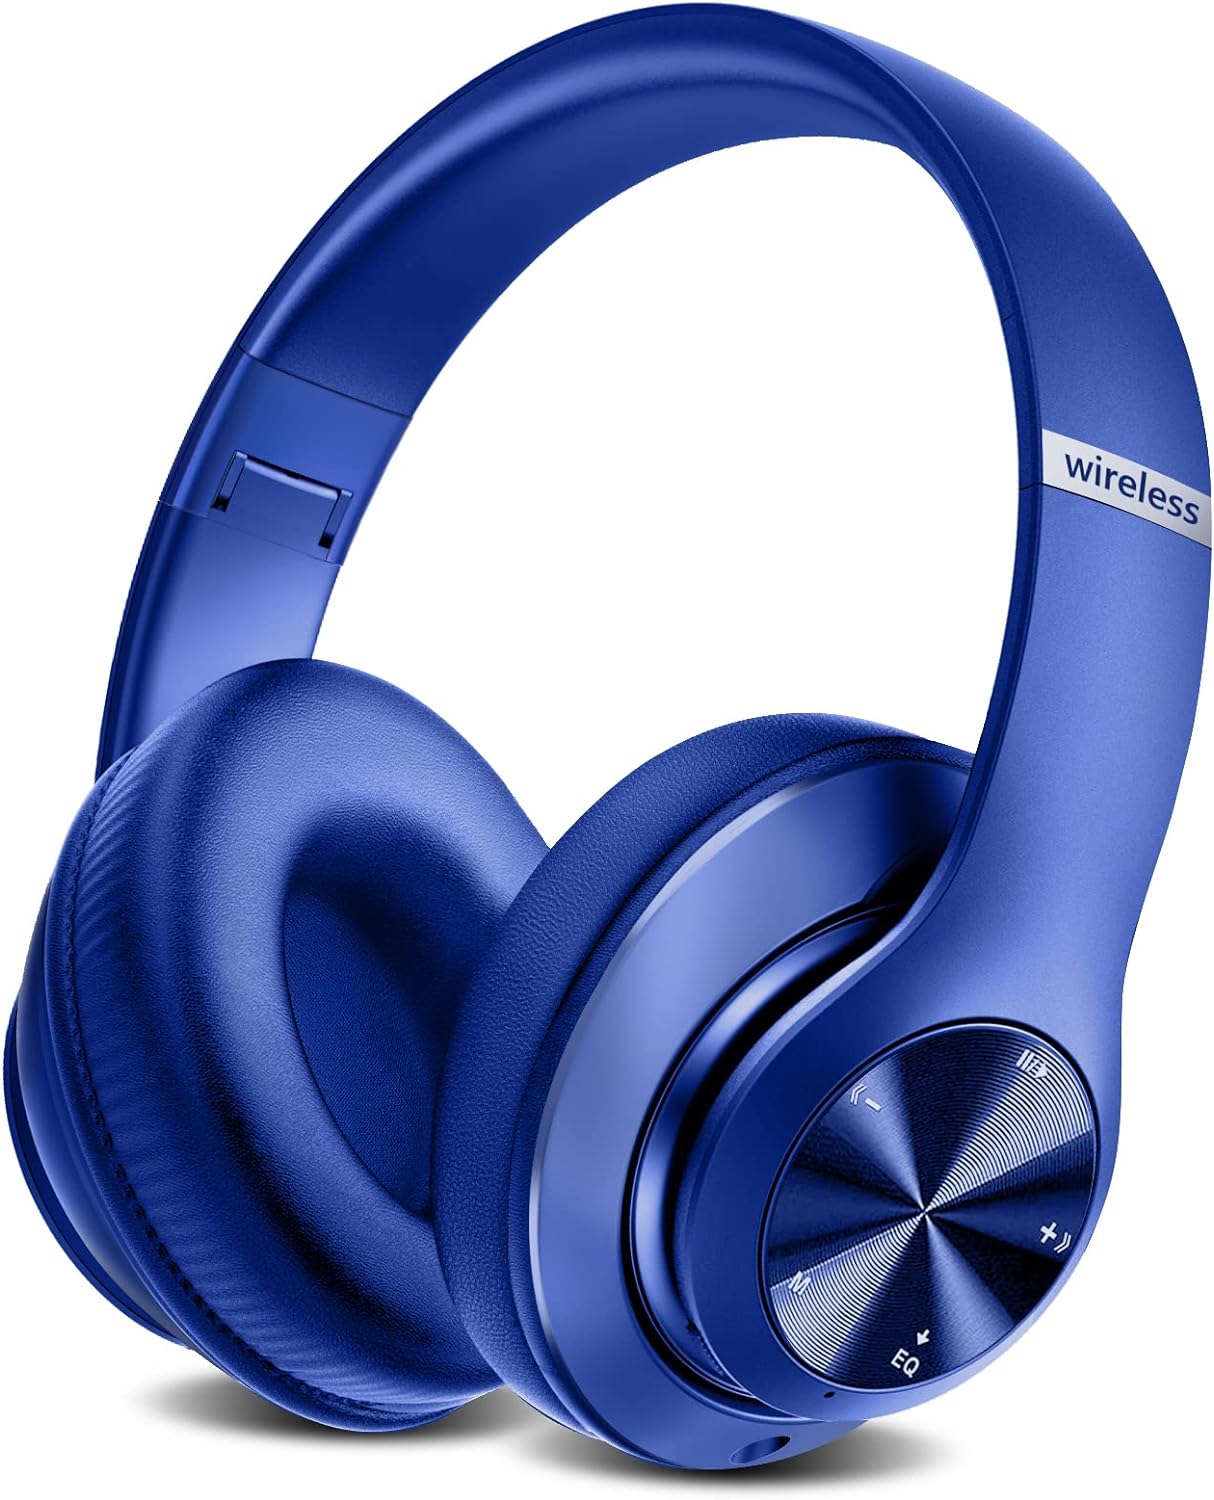 Lankey Sound Bluetooth Headphones, 60 Hours Playtime, Lightweight Headphones Wireless Bluetooth with 6 EQ Modes, HiFi Stereo Foldable Headset with Microphone for Mobile Phone/PC/Home (Blue)